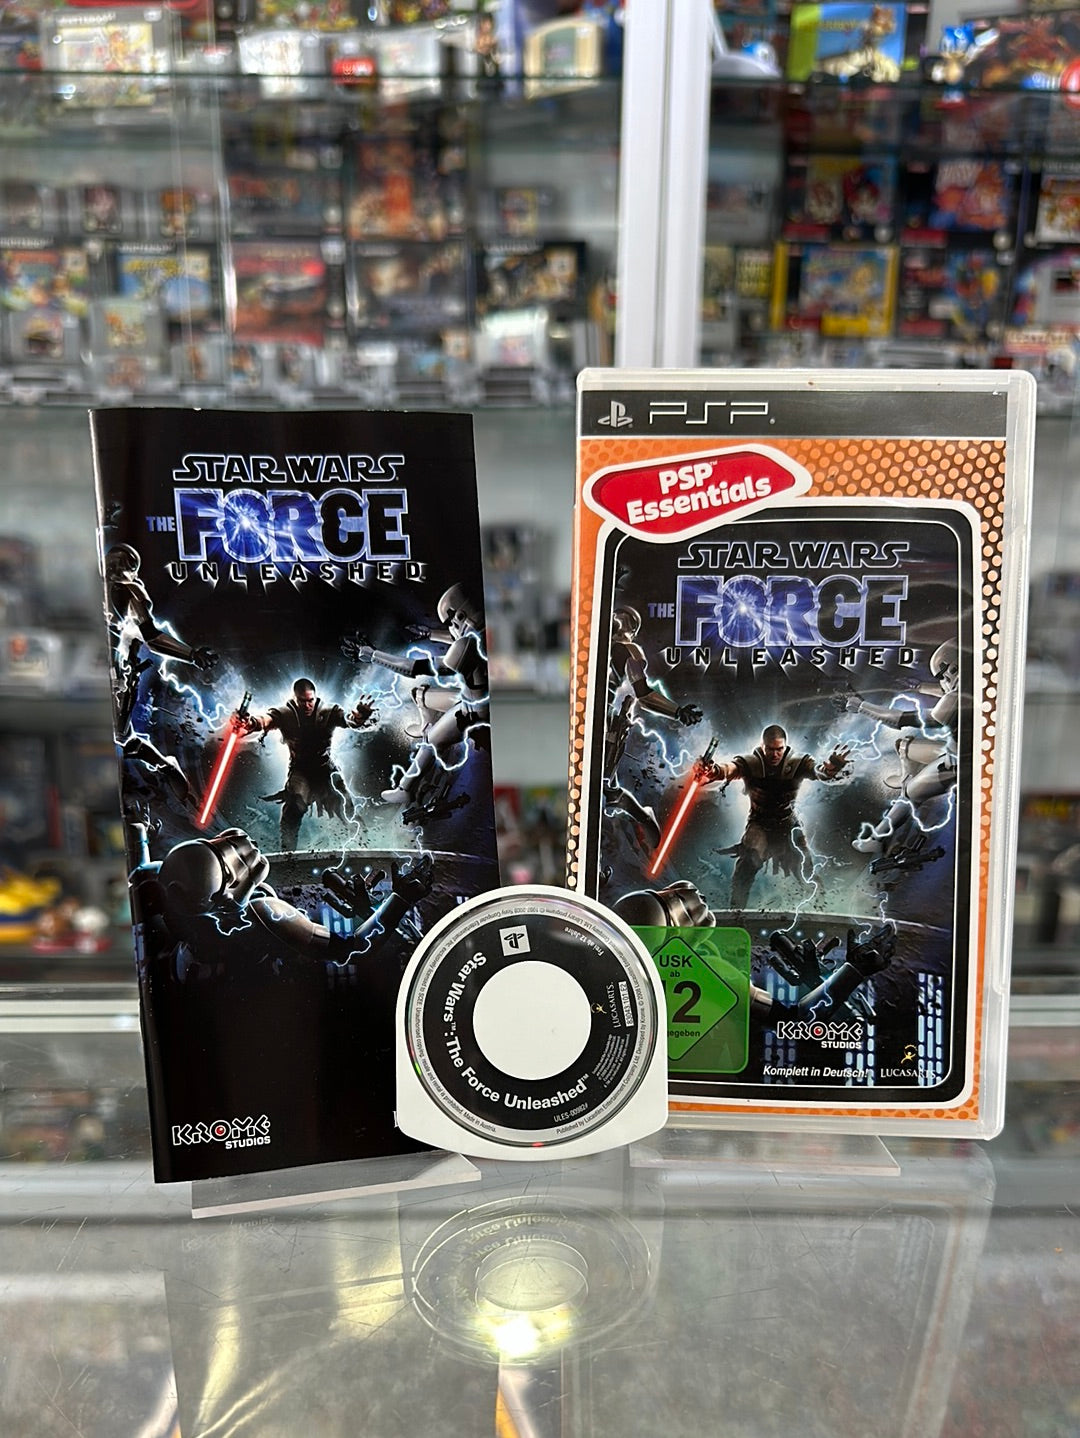 PSP Star Wars The Force Unleashed Essentials